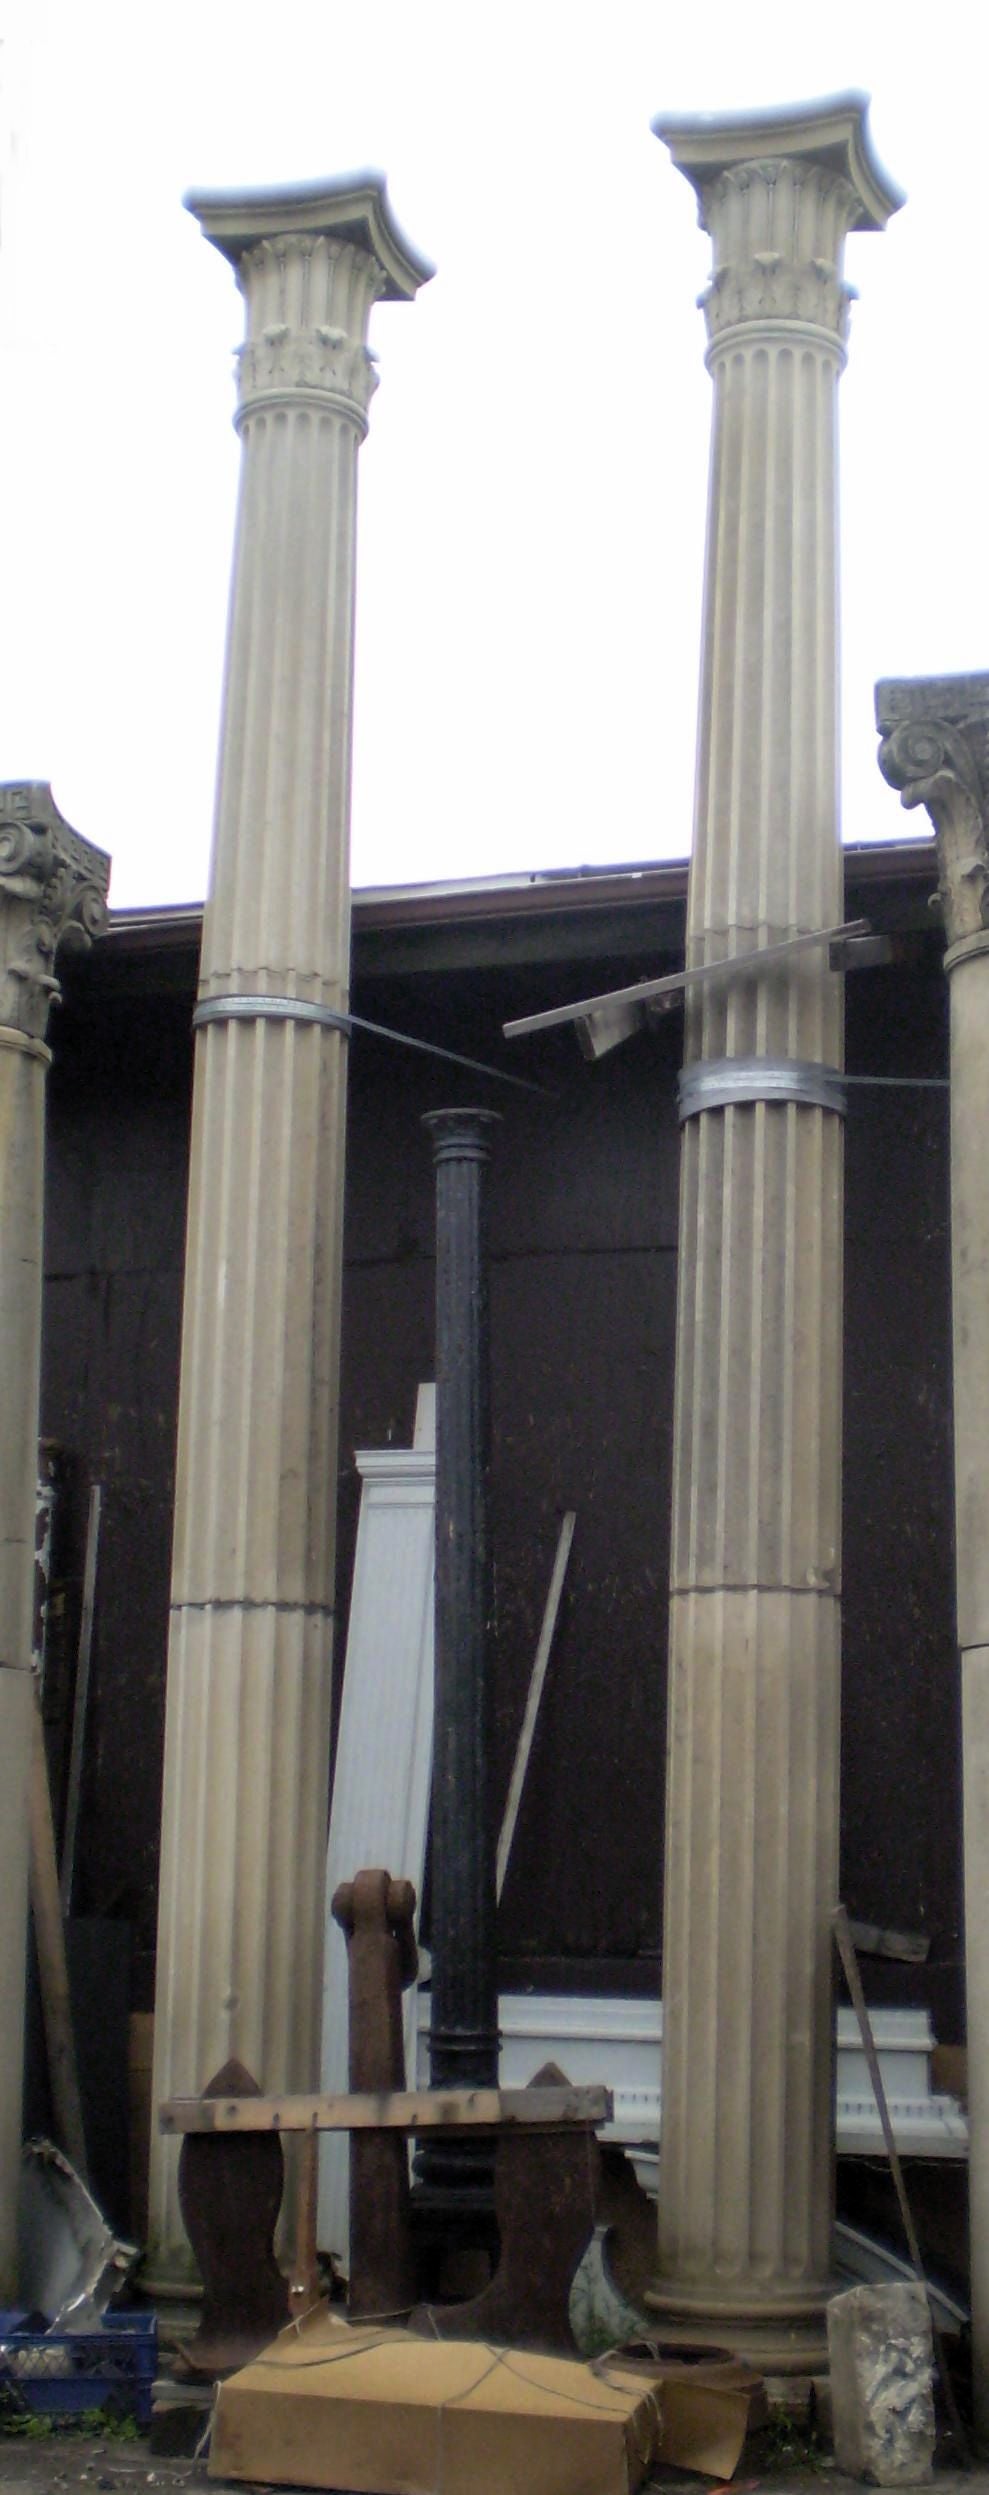 Pair of Tall Limestone Columns with Doric Capitals